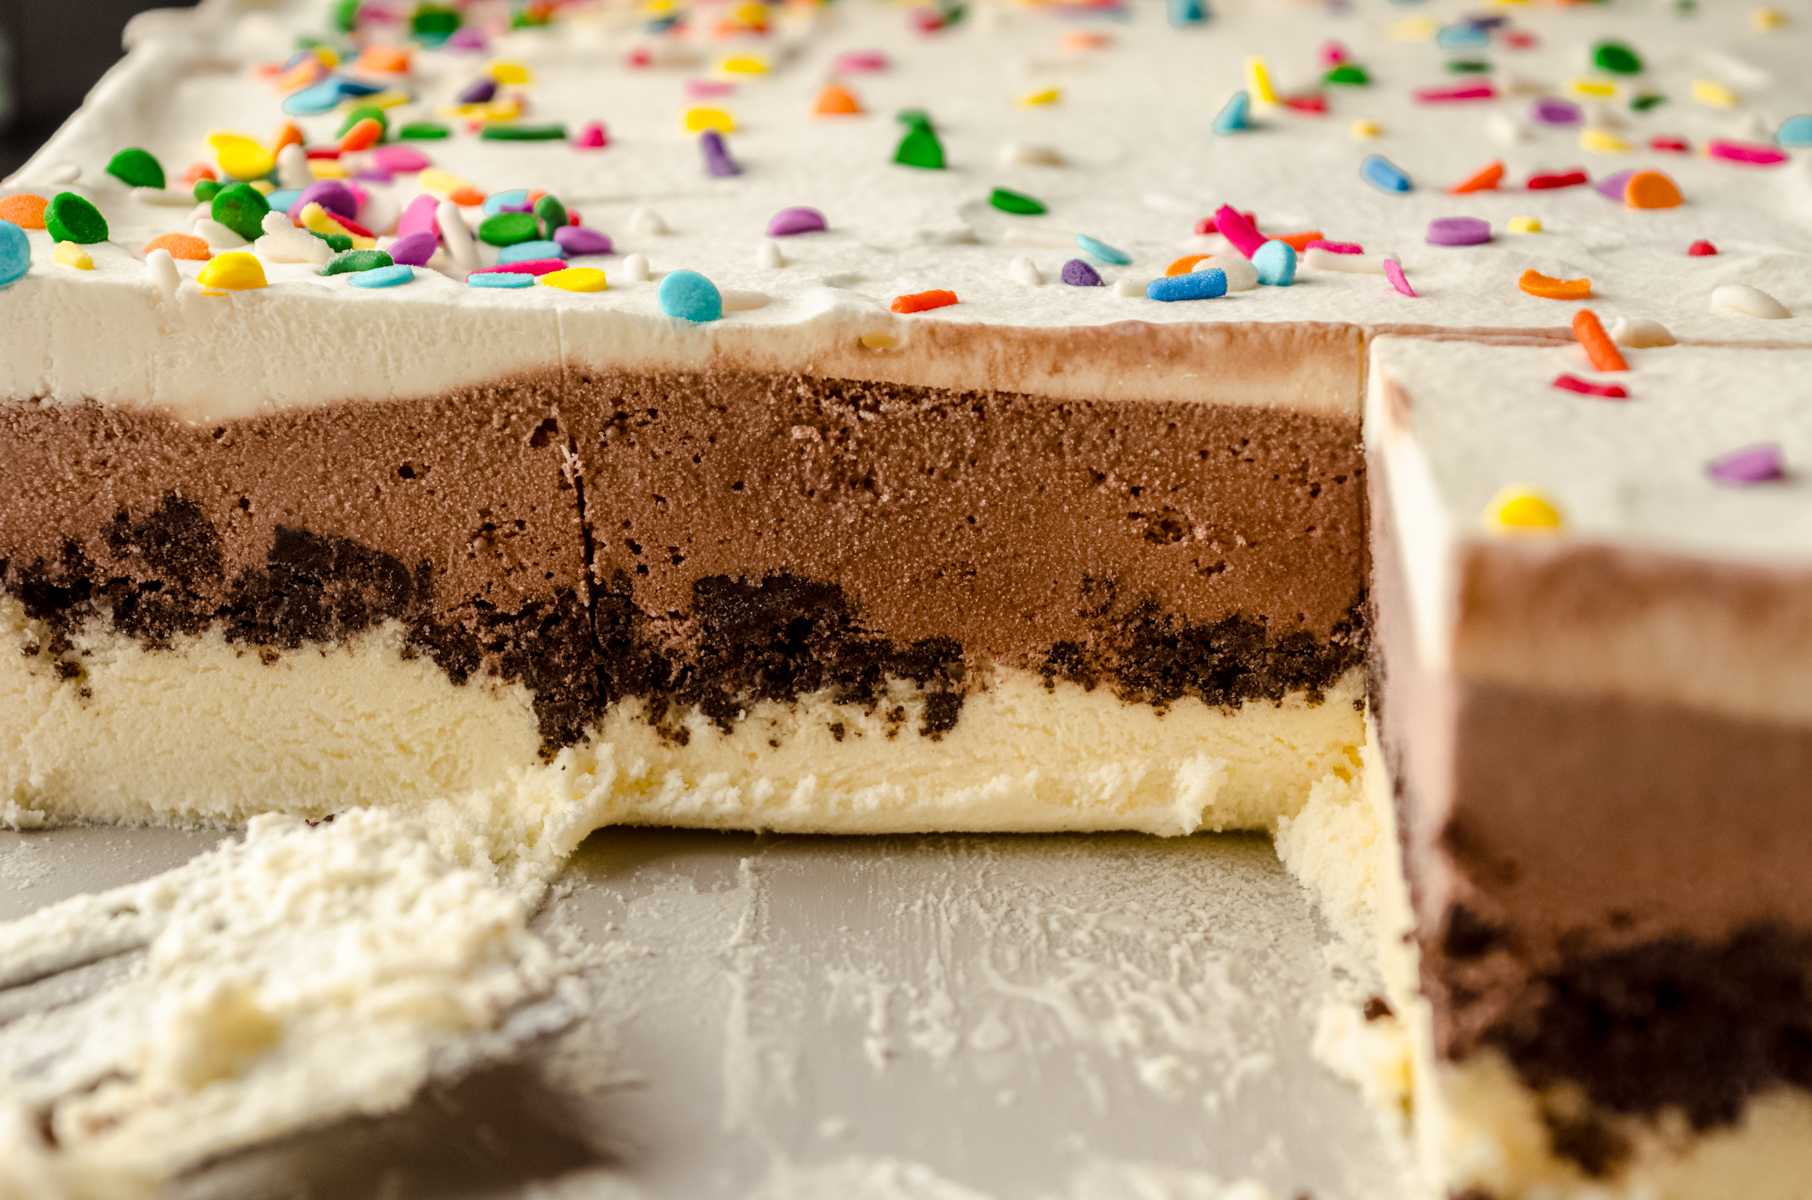 The cross-section of an ice cream sheet cake in a baking dish.